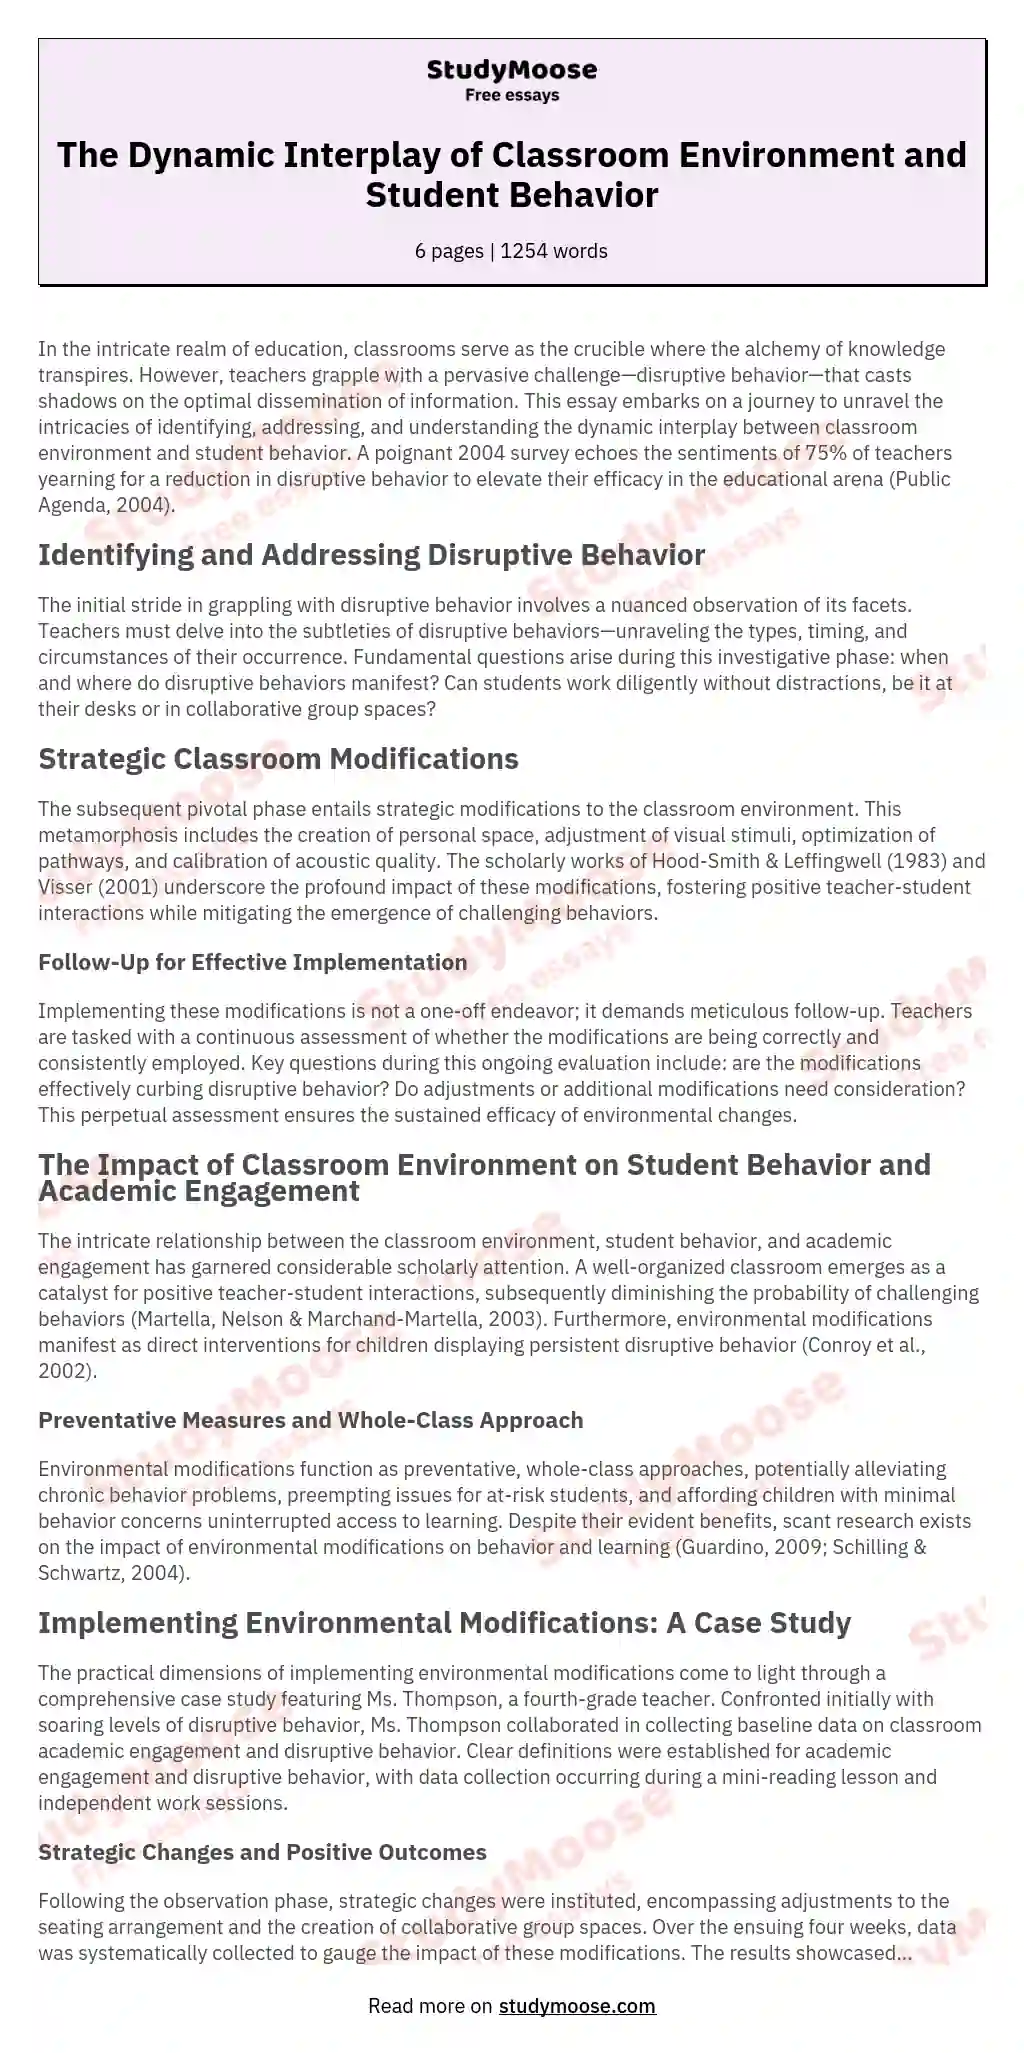 The Dynamic Interplay of Classroom Environment and Student Behavior essay